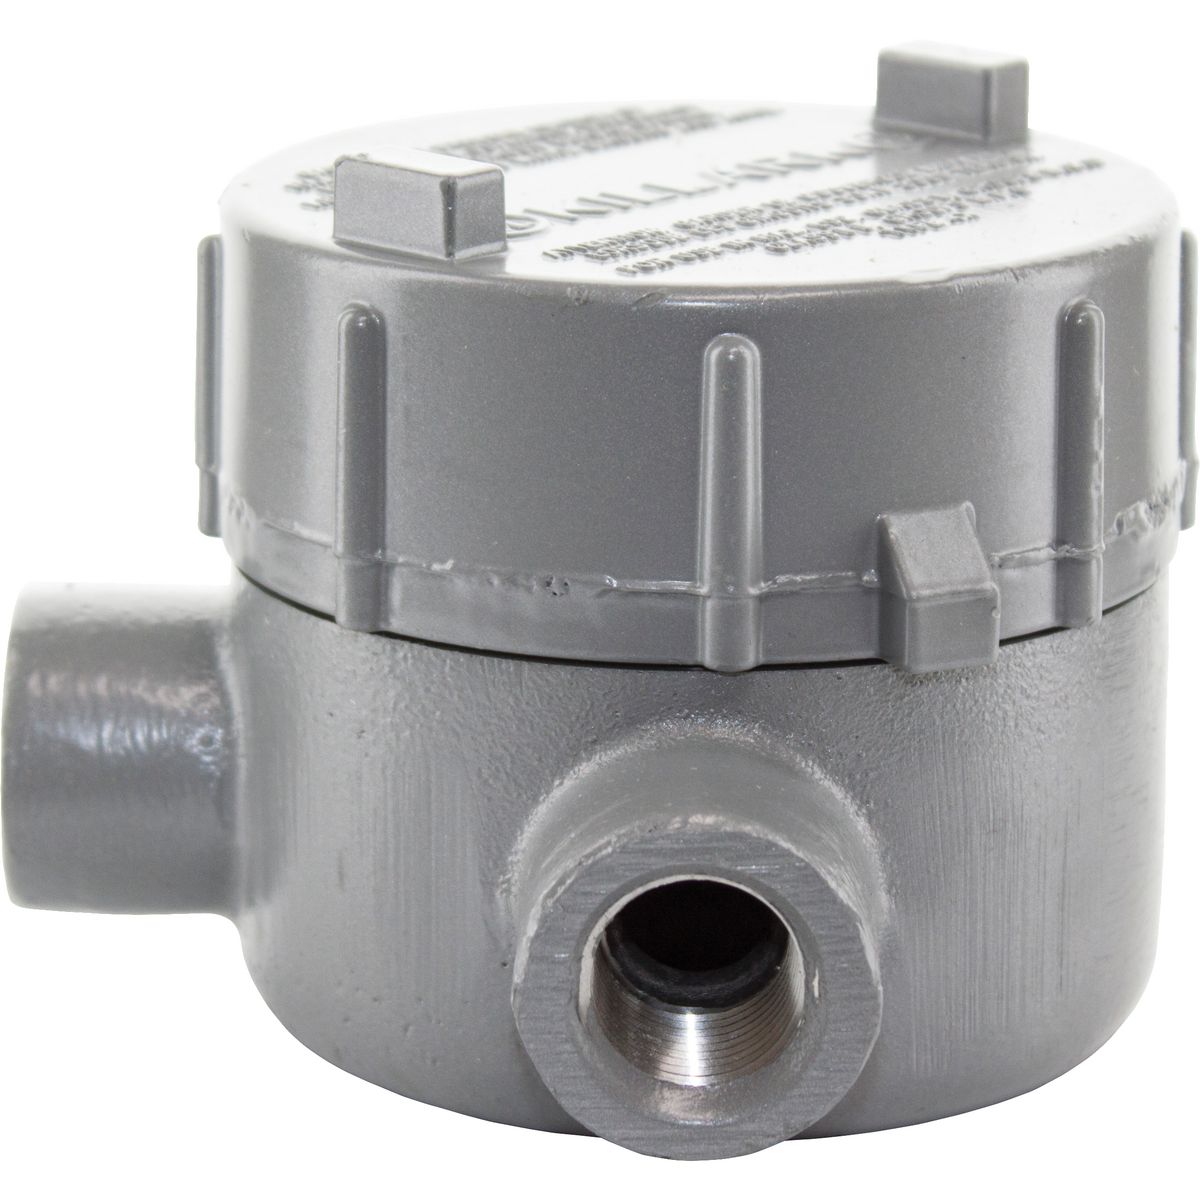 GEC SERIES FITTINGS - IRON - L TYPE OUTLET BODY - HUB SIZE 1 IN - VOLUME18.0 CU IN